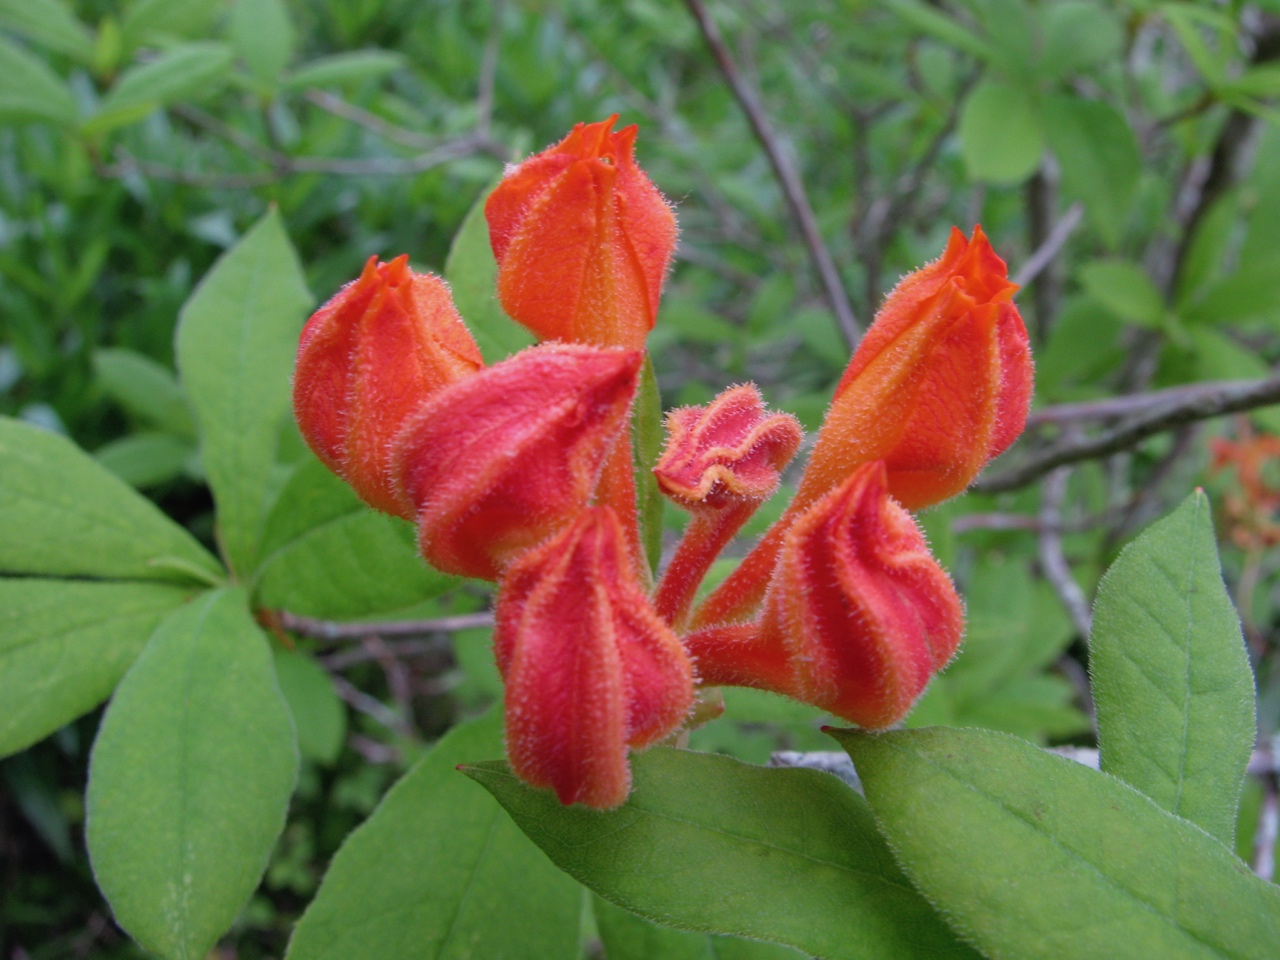 The Scientific Name is Rhododendron calendulaceum. You will likely hear them called Flame Azalea. This picture shows the Flower buds ready to open of Rhododendron calendulaceum